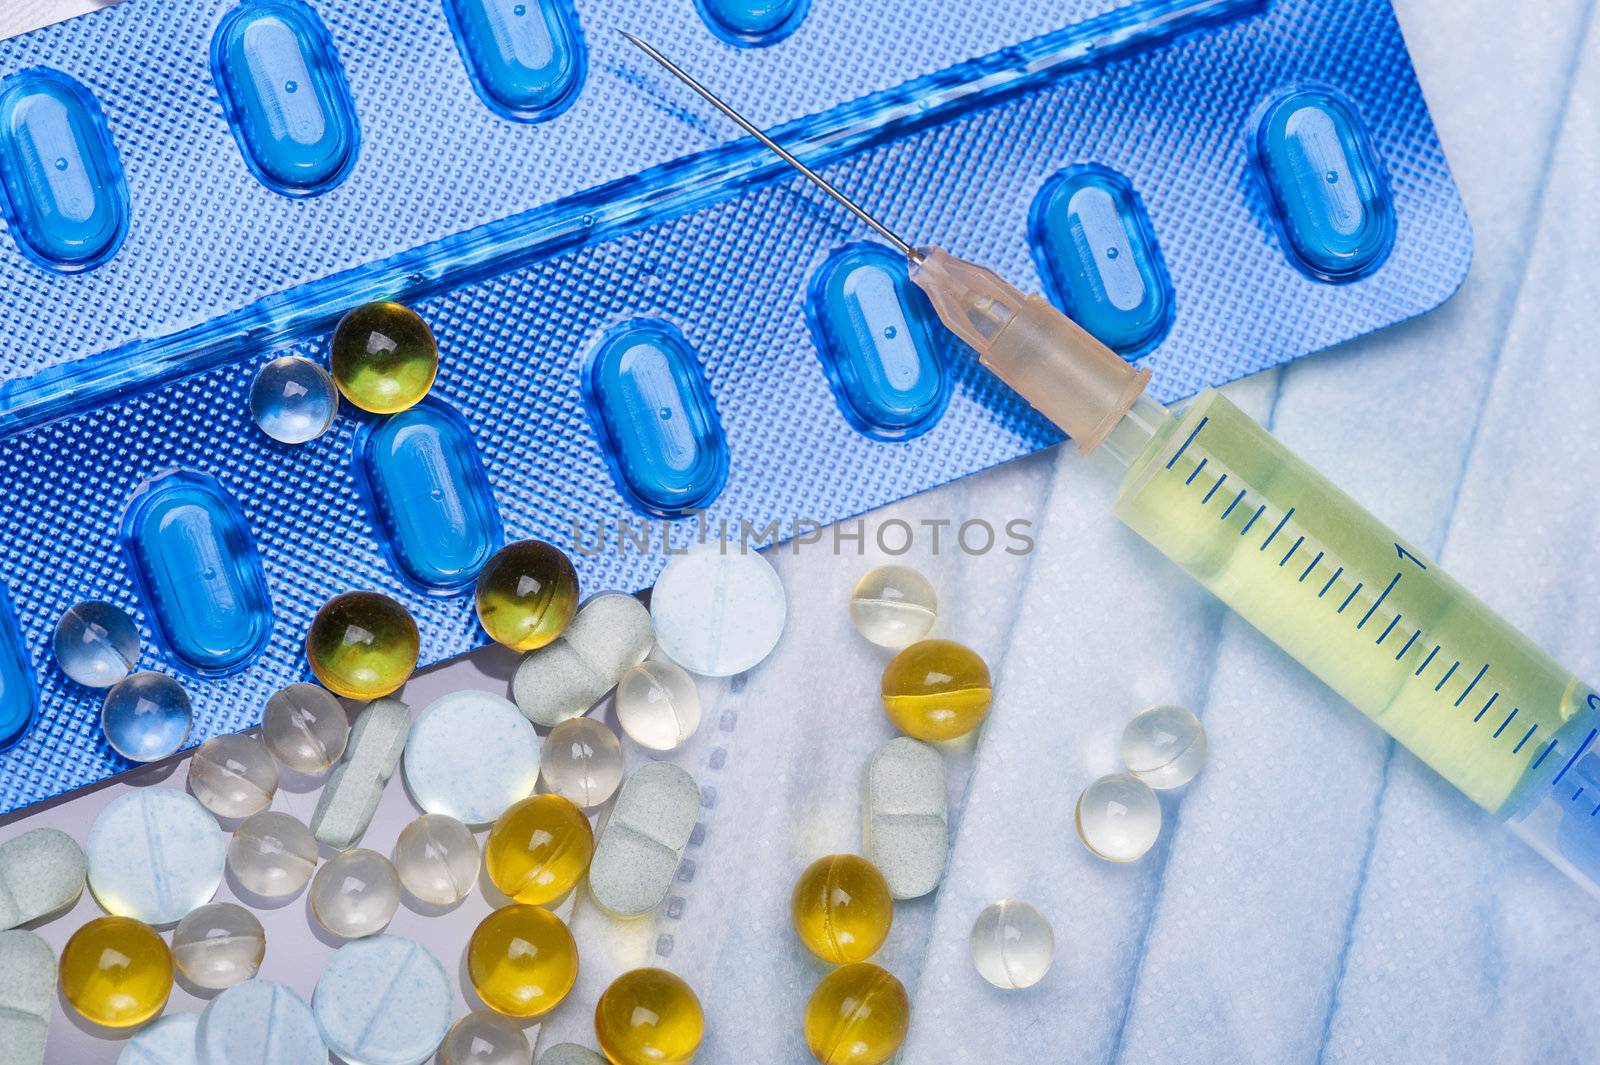 pharmaceutical products and medical mask on white background